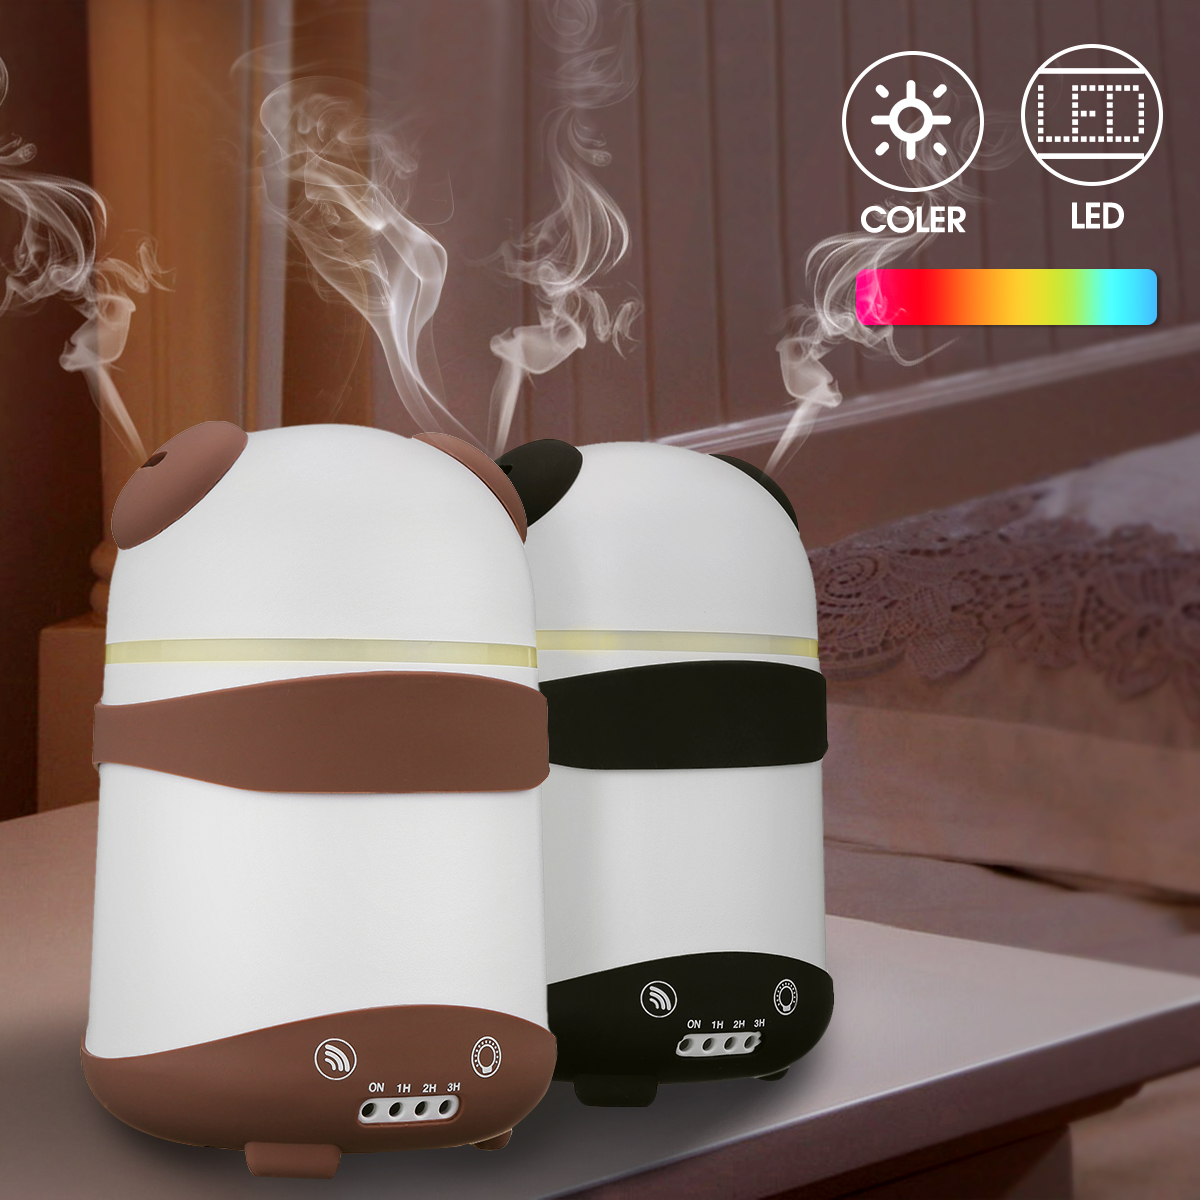 Dual-Humidifier-Air-Oil-Diffuser-Aroma-Mist-Maker-LED-Cartoon-Panda-Style-For-Home-Office-US-Plug-1376138-2